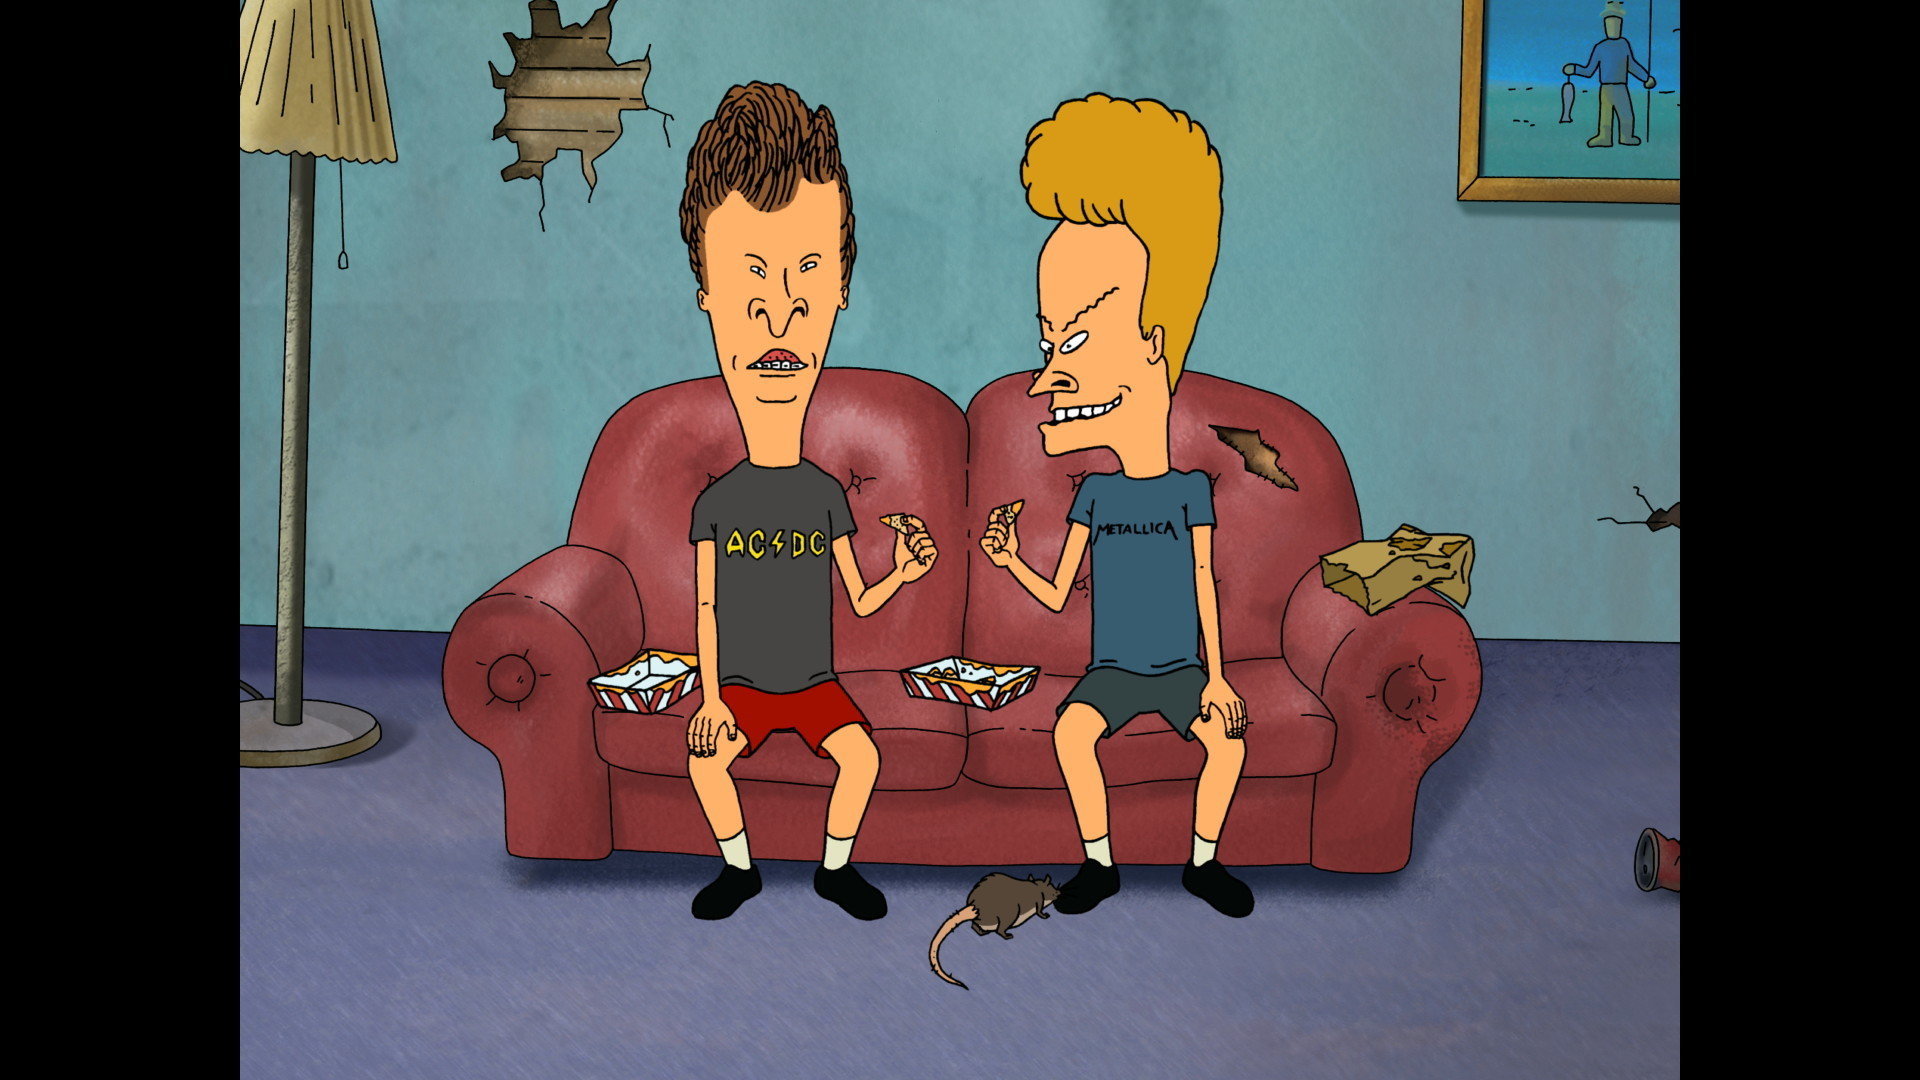 download new beavis and buttheads movie